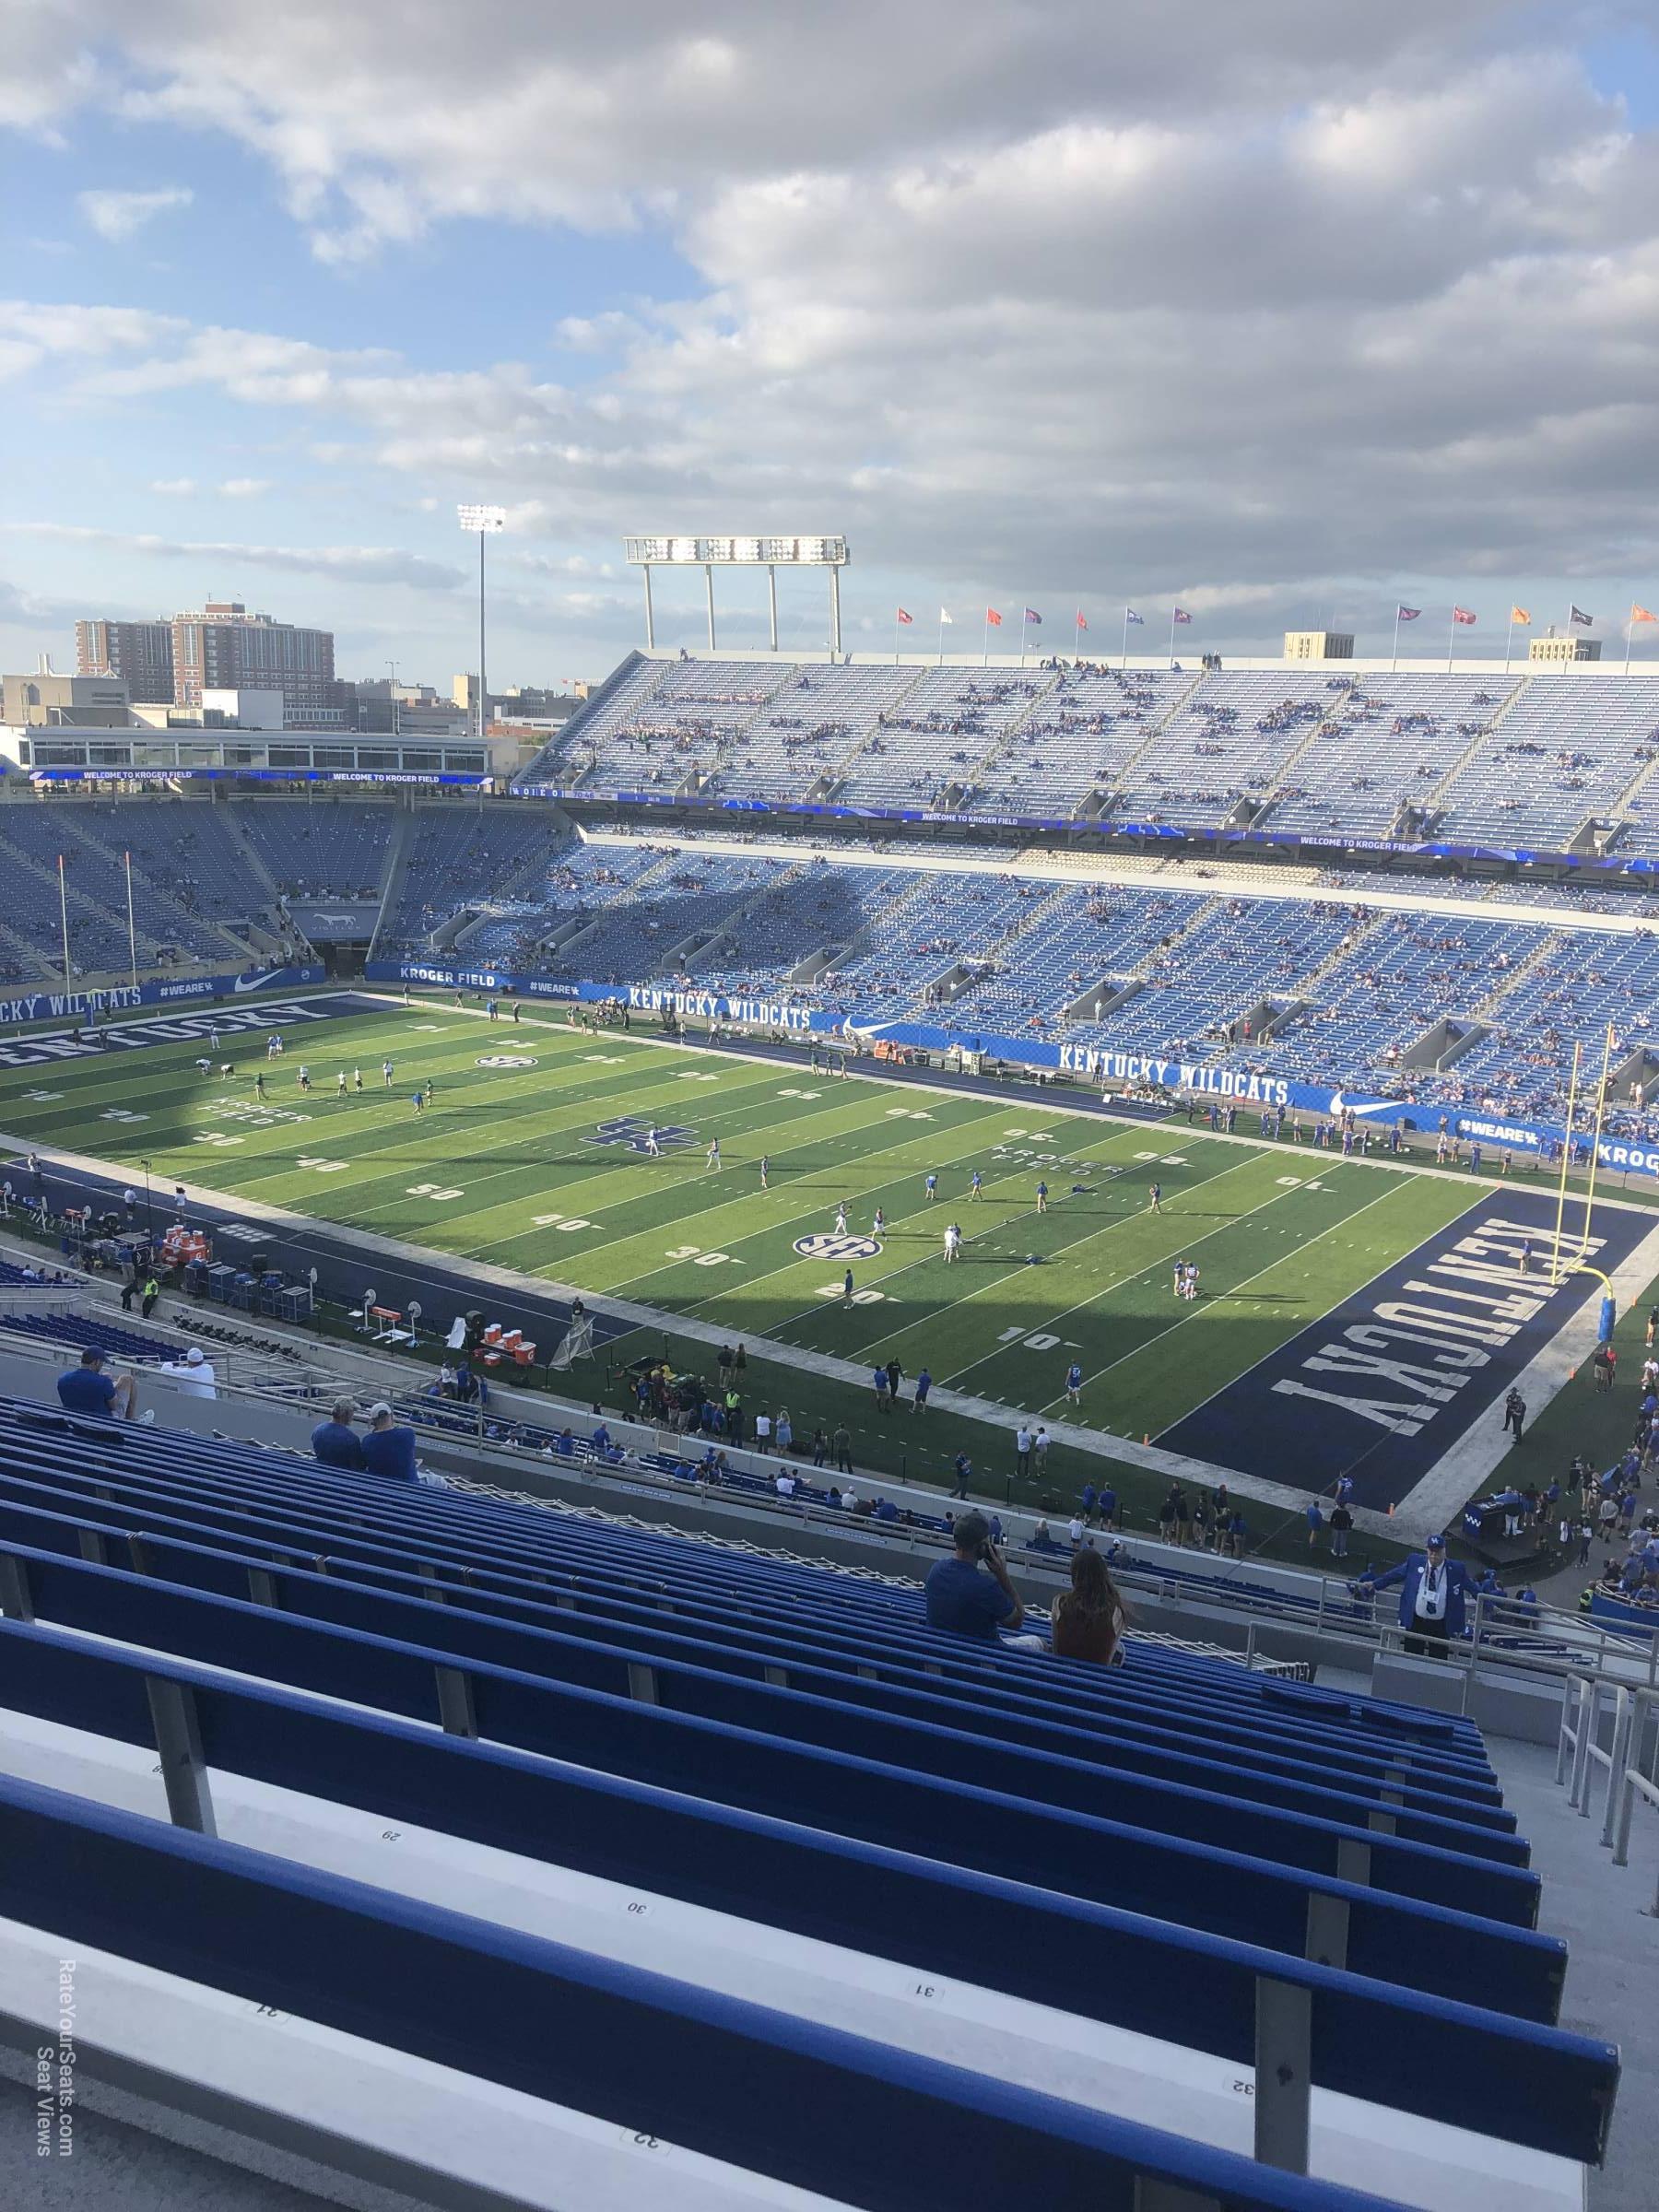 section 230, row 25 seat view  - kroger field